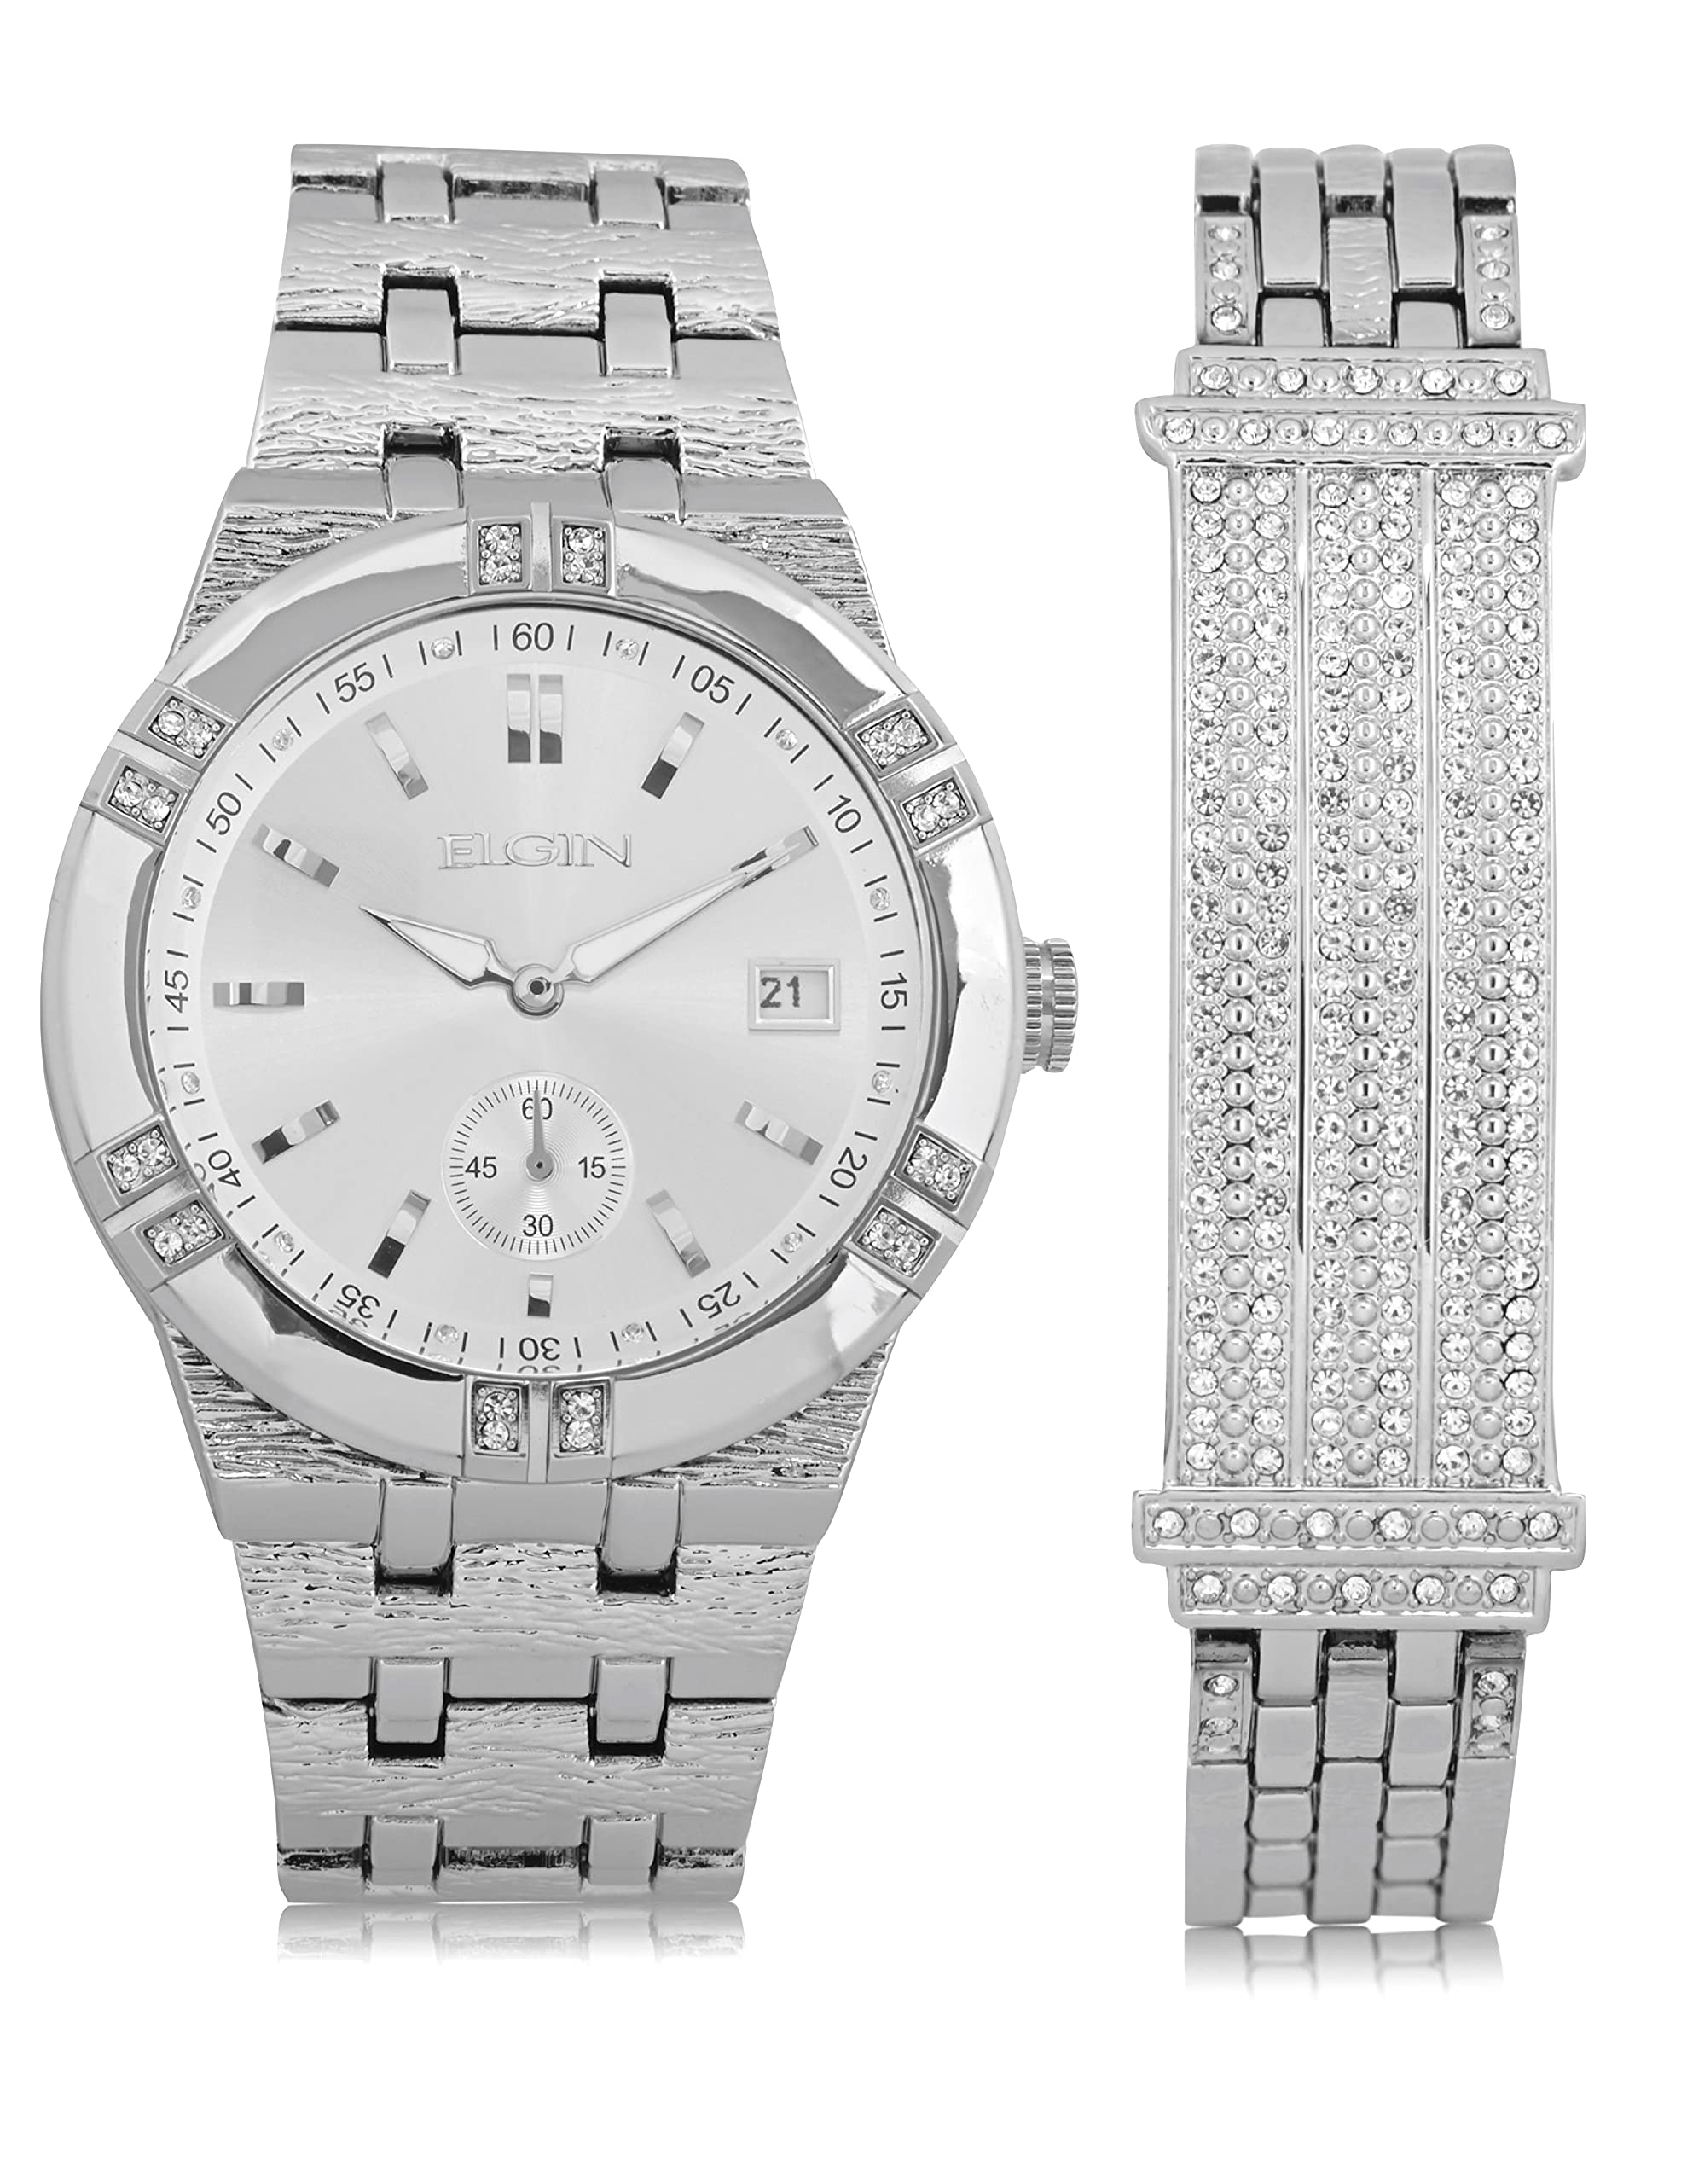 Elgin Men's Silver-Tone Analog Watch with Crystal Accents (Model FG170010STAZ)